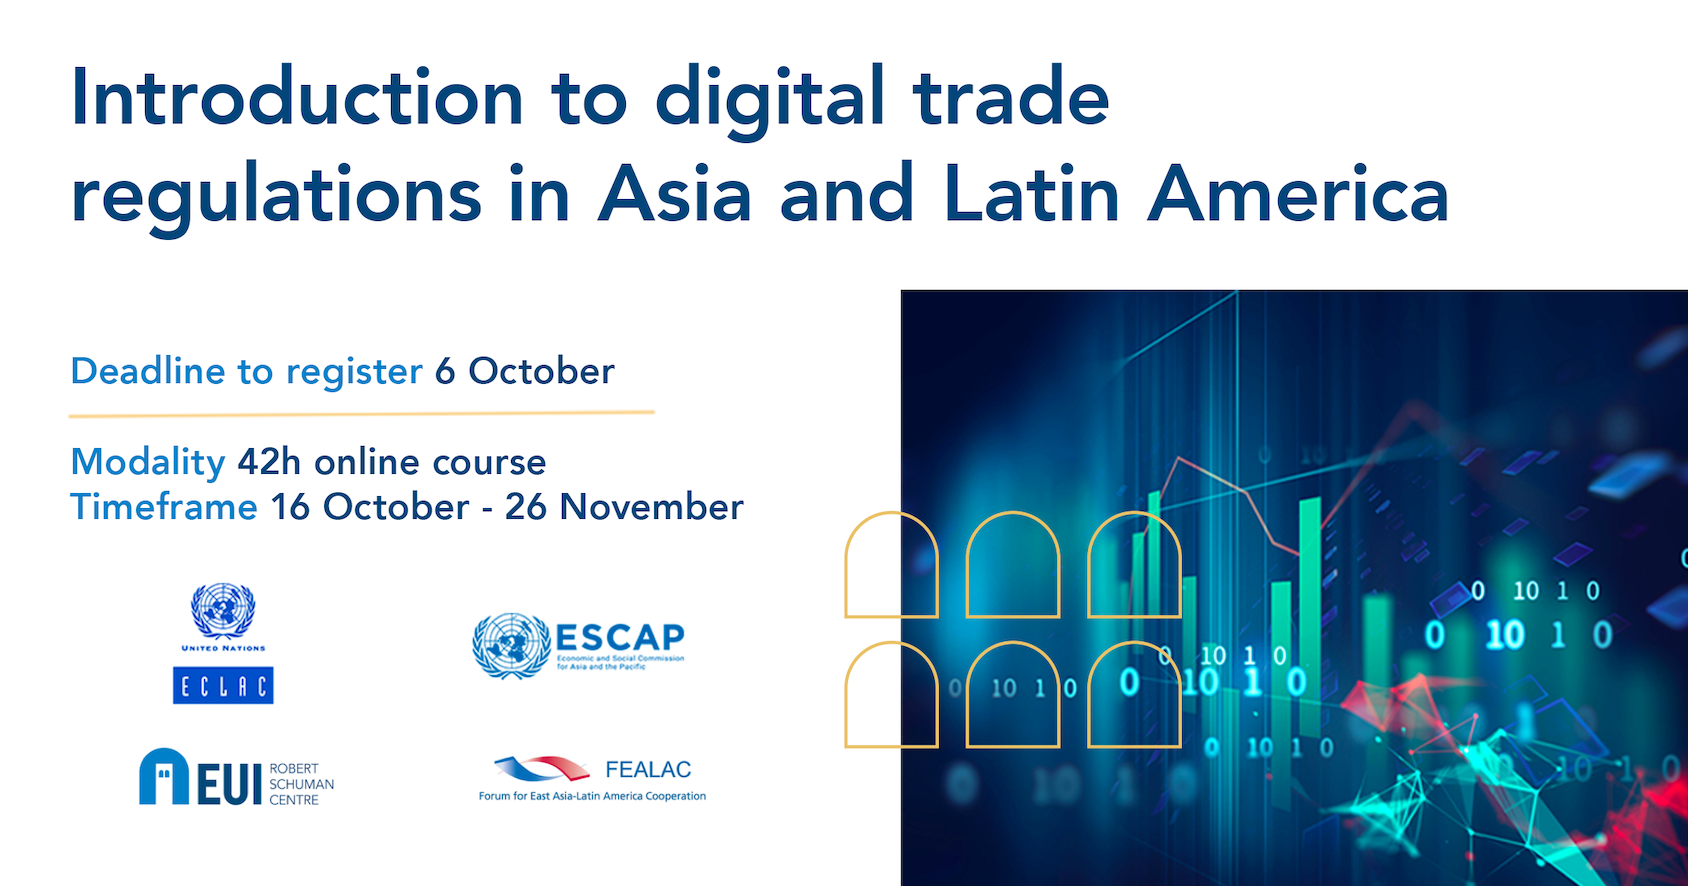 Introduction to digital trade regulations in Asia and Latin America